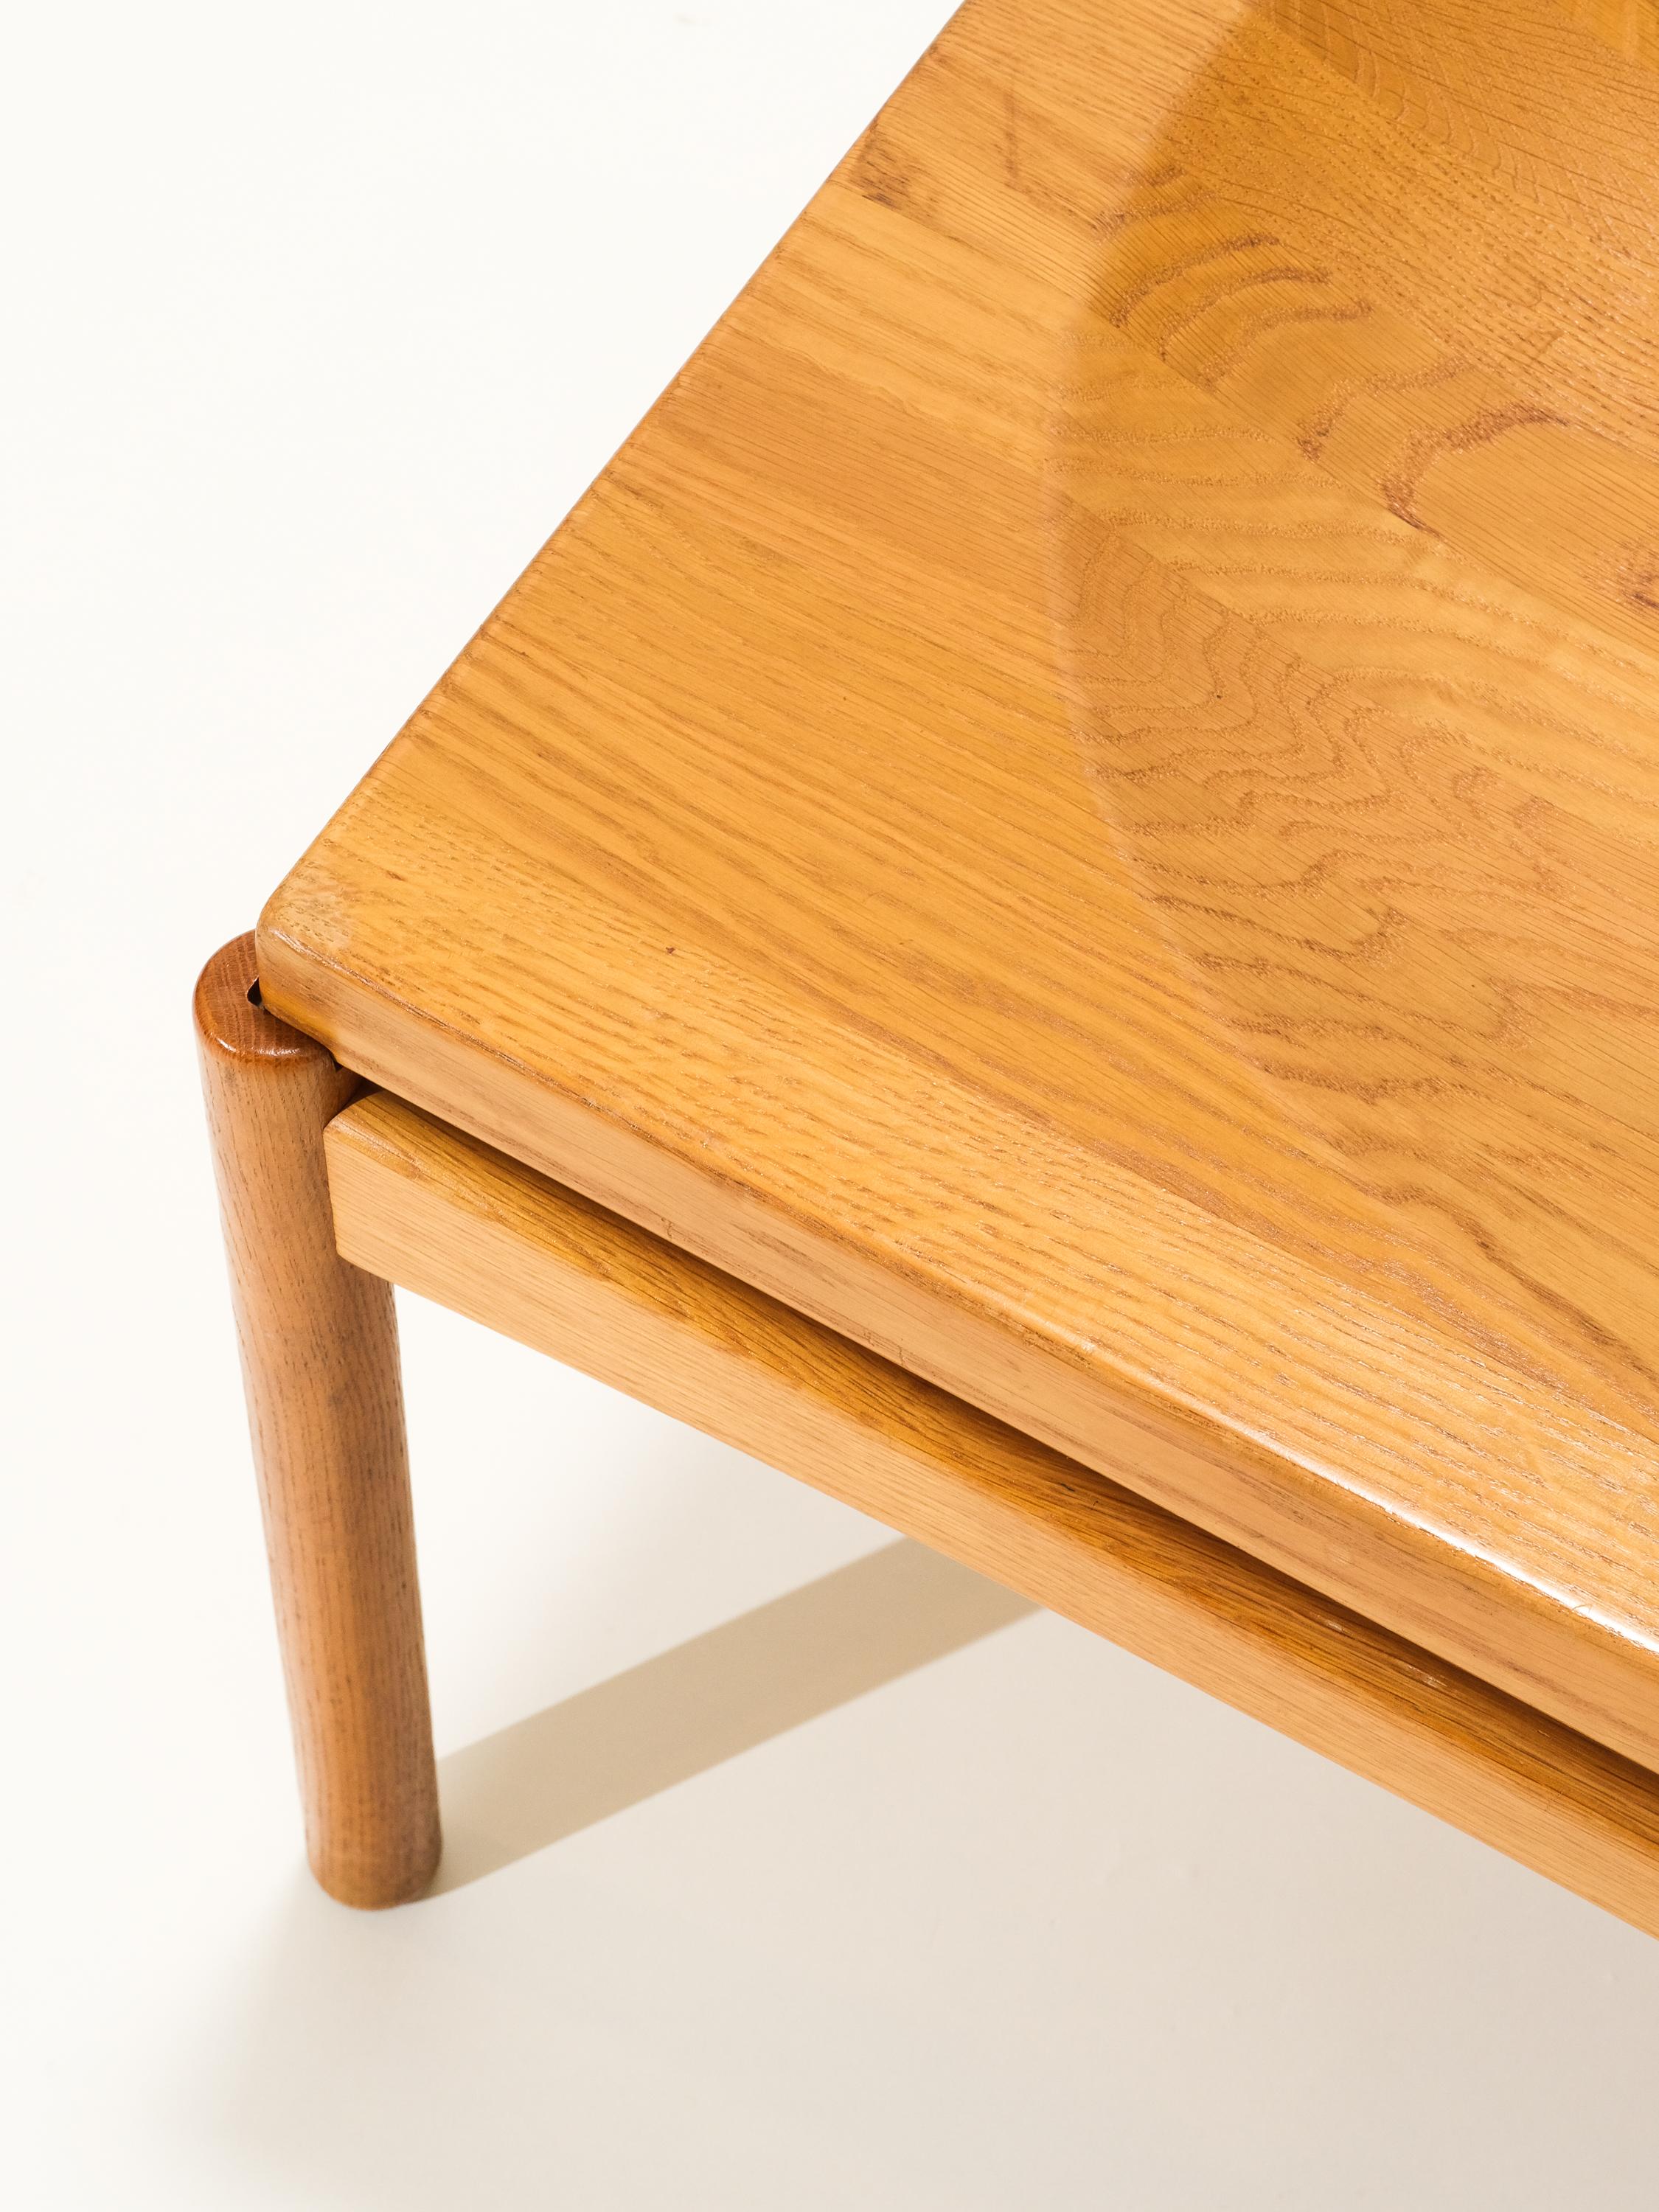 Solid Oak Coffee/Tray Table by Gunnar Myrstrand for Källemo, Sweden, 1960s For Sale 2